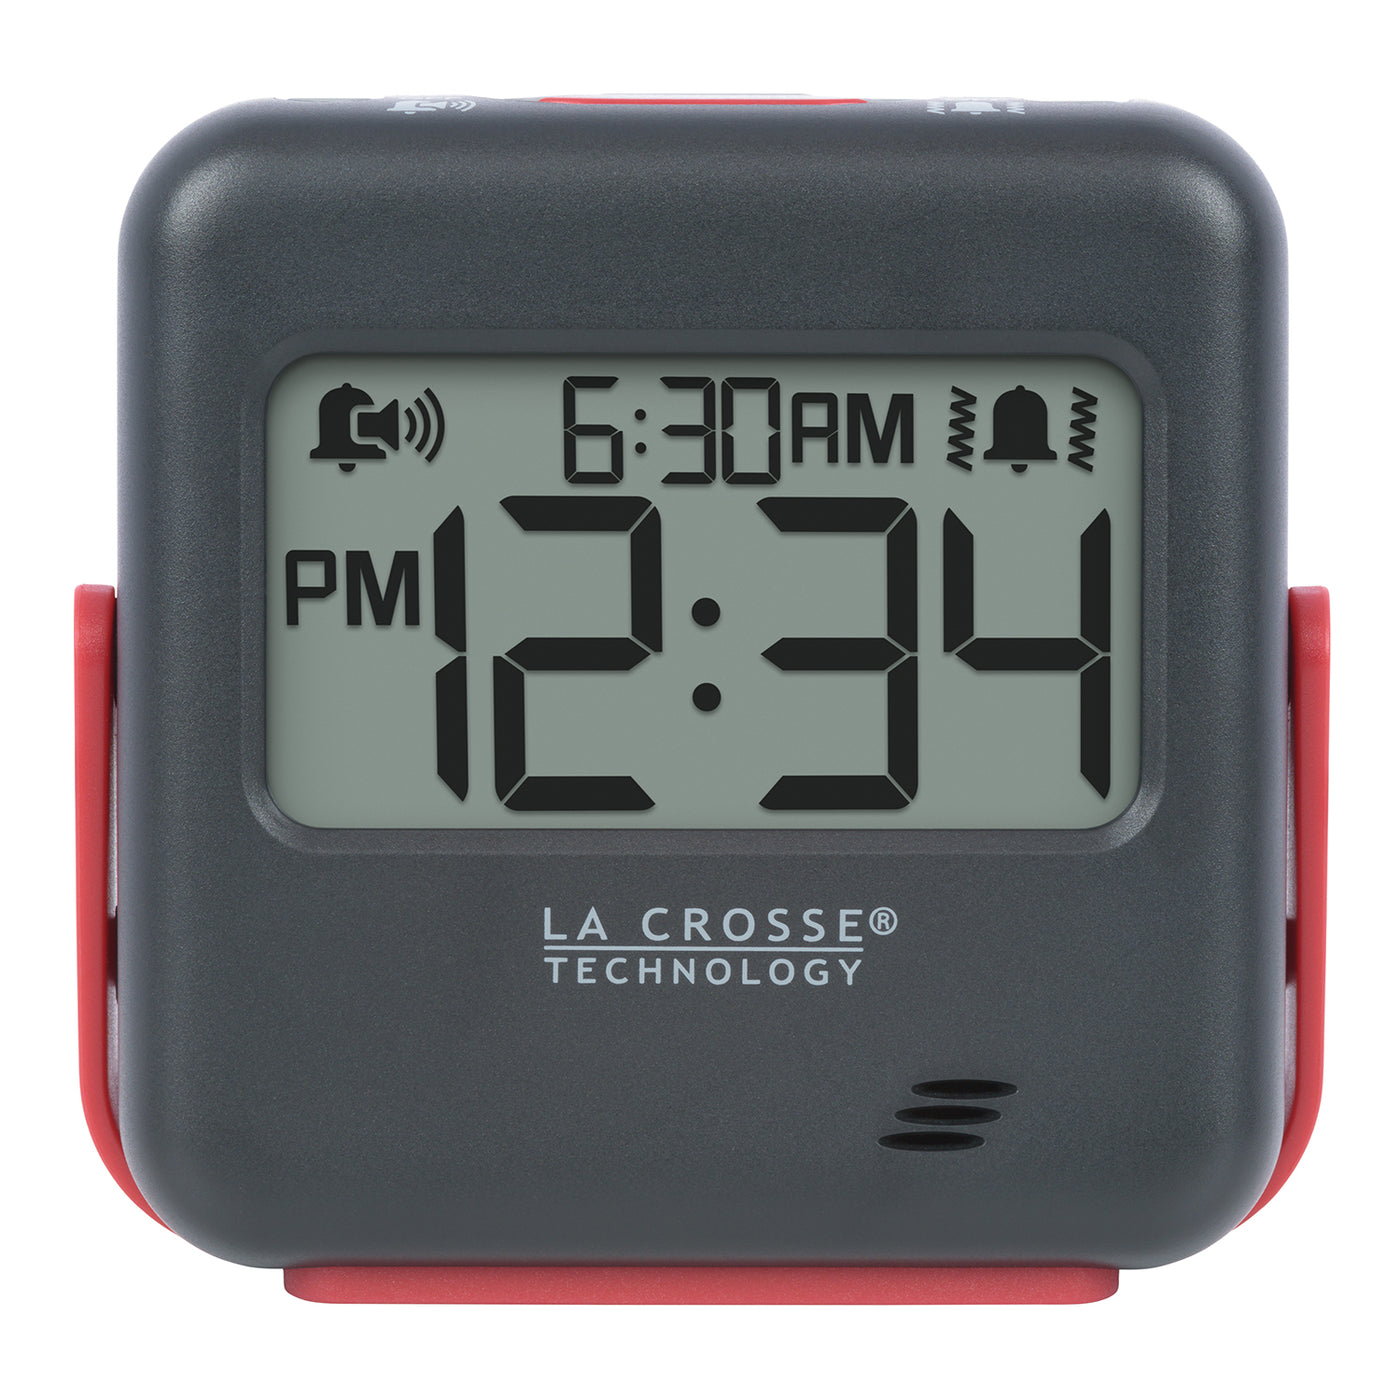 617-147 Buzz Digital Alarm Clock with Vibration and Loud Sound